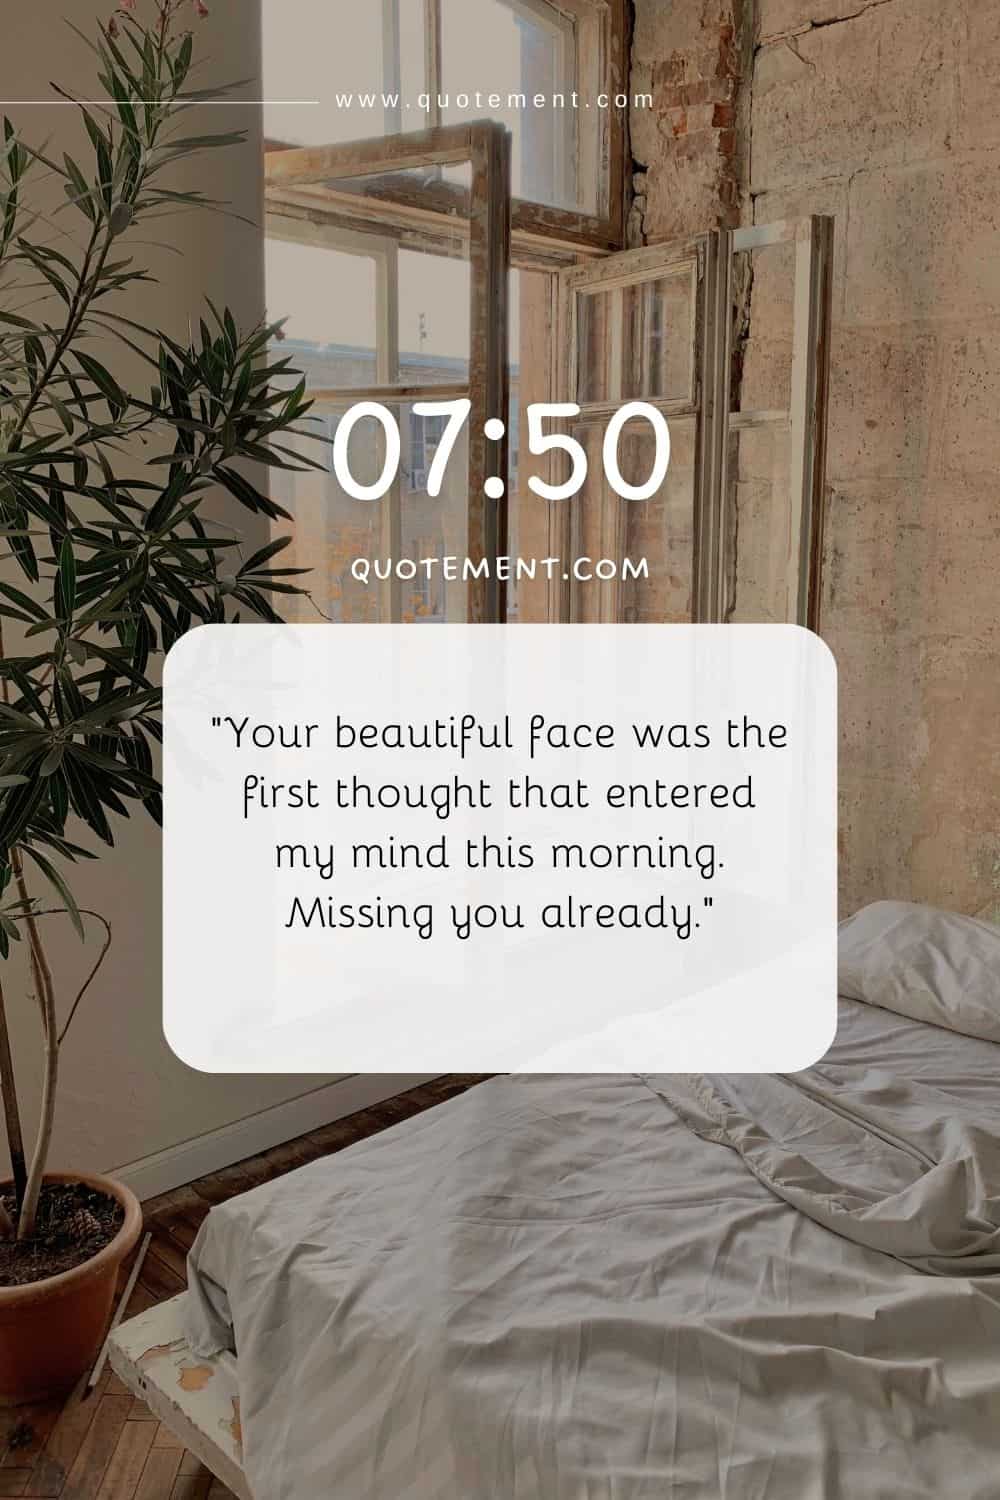 message with a bedroom background on a phone screen